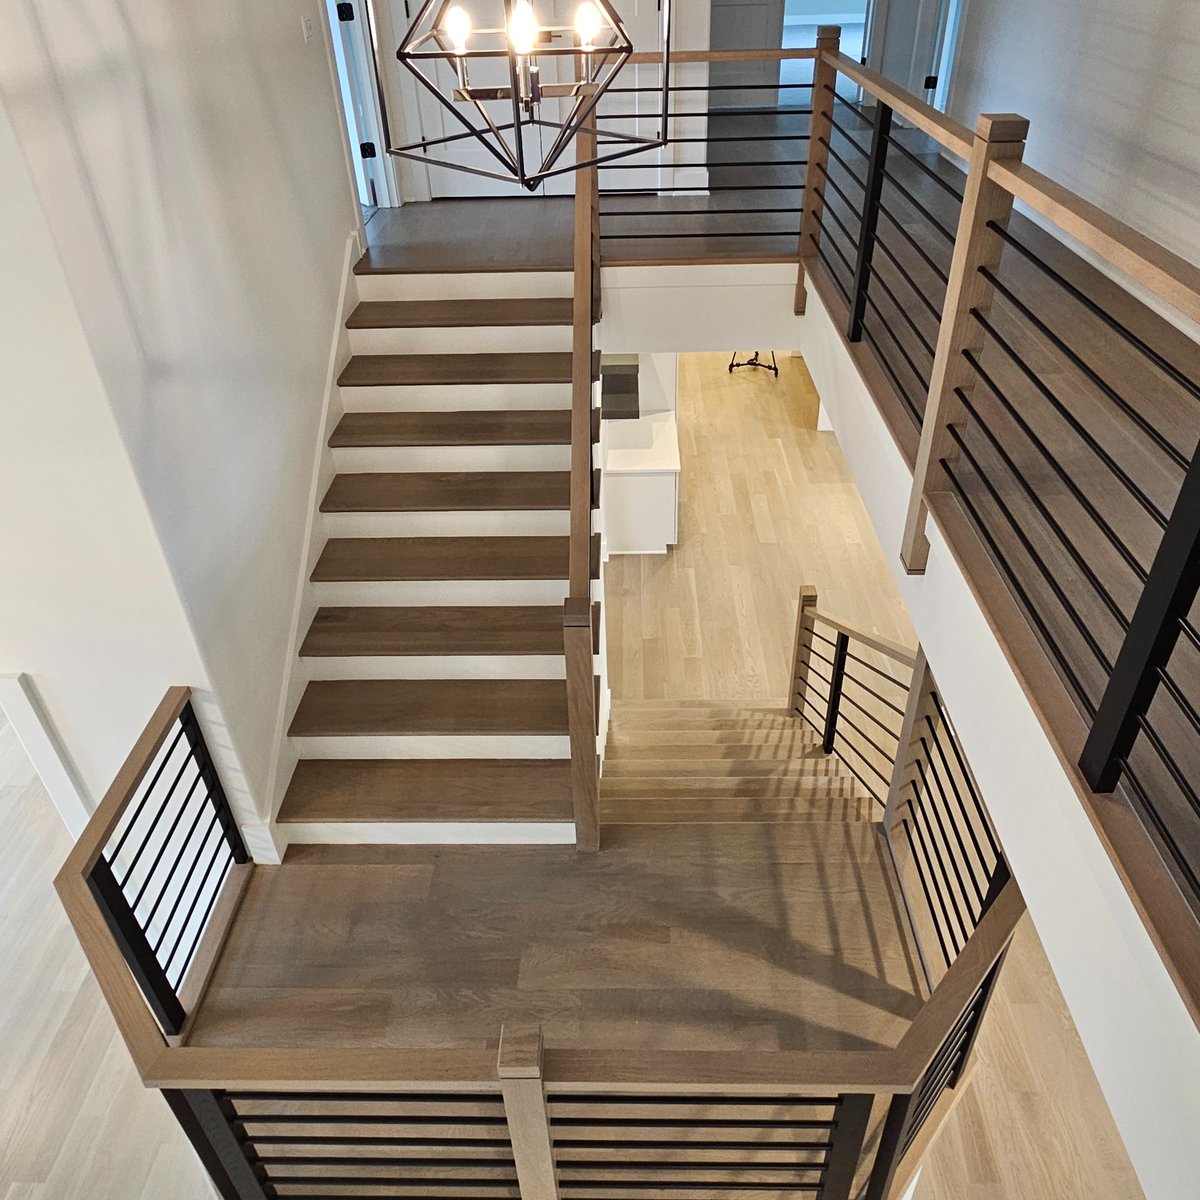 We're loving this modern #staircase in one of our #newhomebuilds! #newhome #newhomedesign #newhomebuilder #newhomeconstruction #newconstruction #homebuilder #homeconstruction #customhome #customhomebuilder #customhomebuild #newhomebuild #staircasedesign